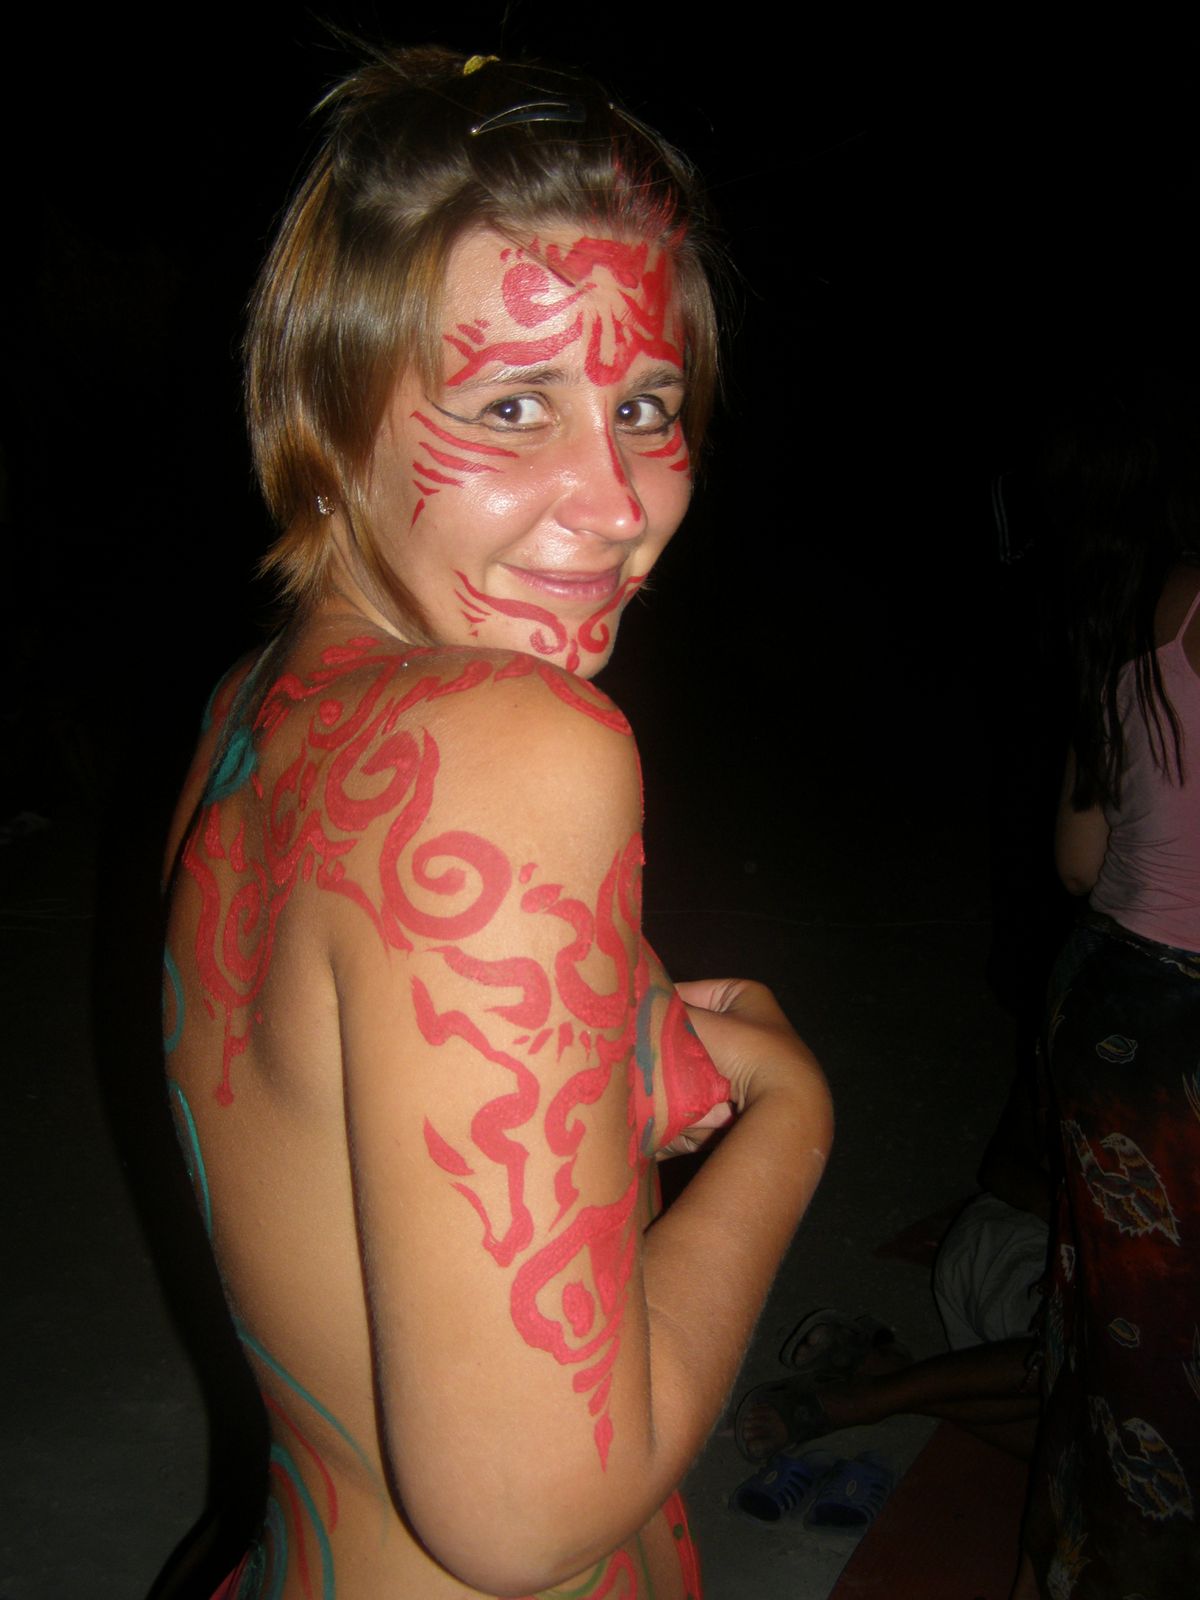 blackedraw blonde milf destroyed on vacation #PublicNudity #CasualNudity #outdoor #bodypaint #smailing